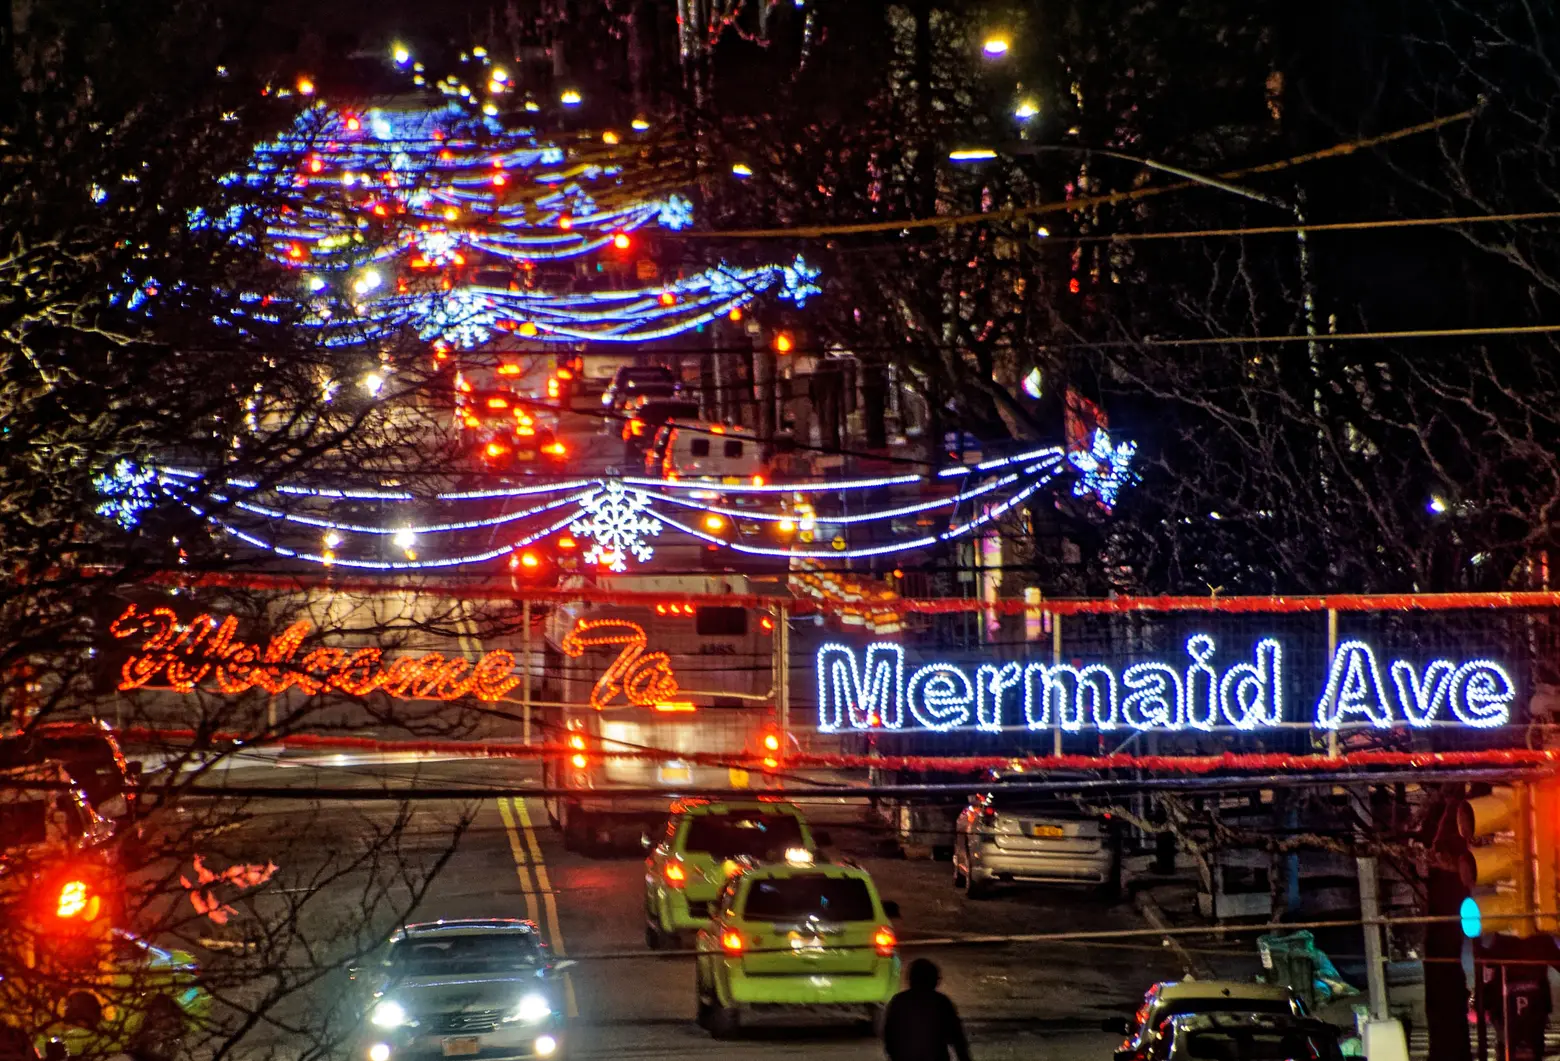 After more than 20 years, Coney Island brings back holiday lights along Mermaid Avenue